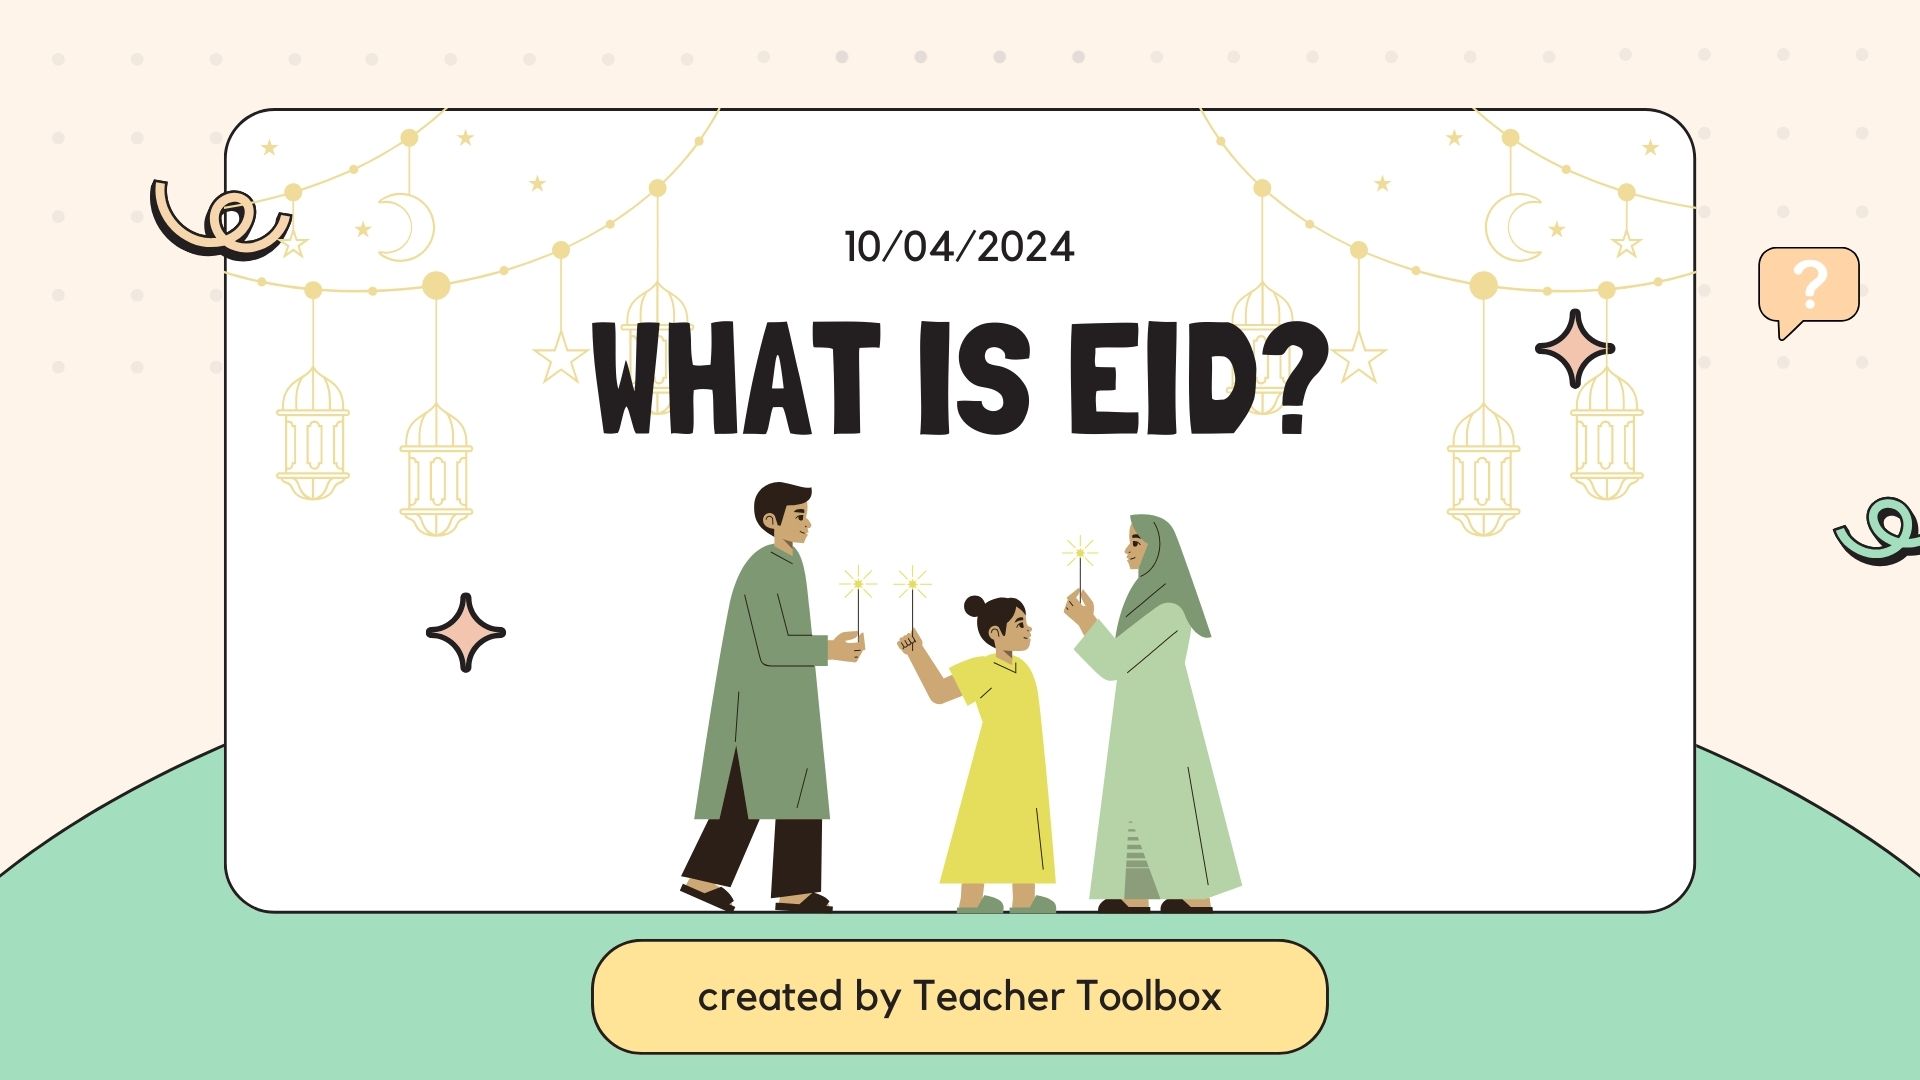 What is Eid? Presentation explaining why Eid is celebrated and how